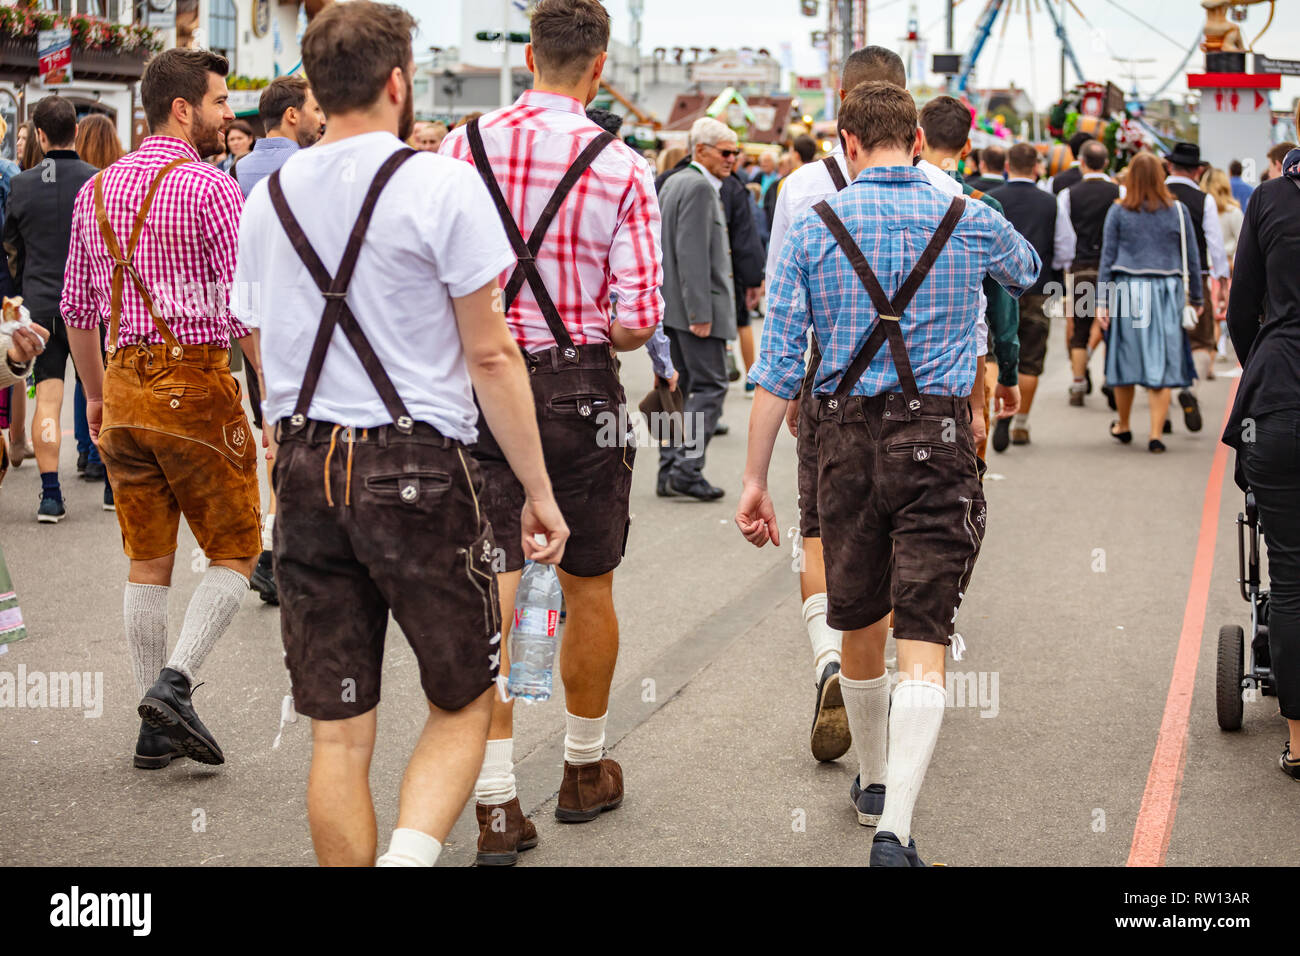 October 7, 2018. Munich, Germany, Oktoberfest, Group of young men in traditional costumes walking among the crowd, back view Stock Photo